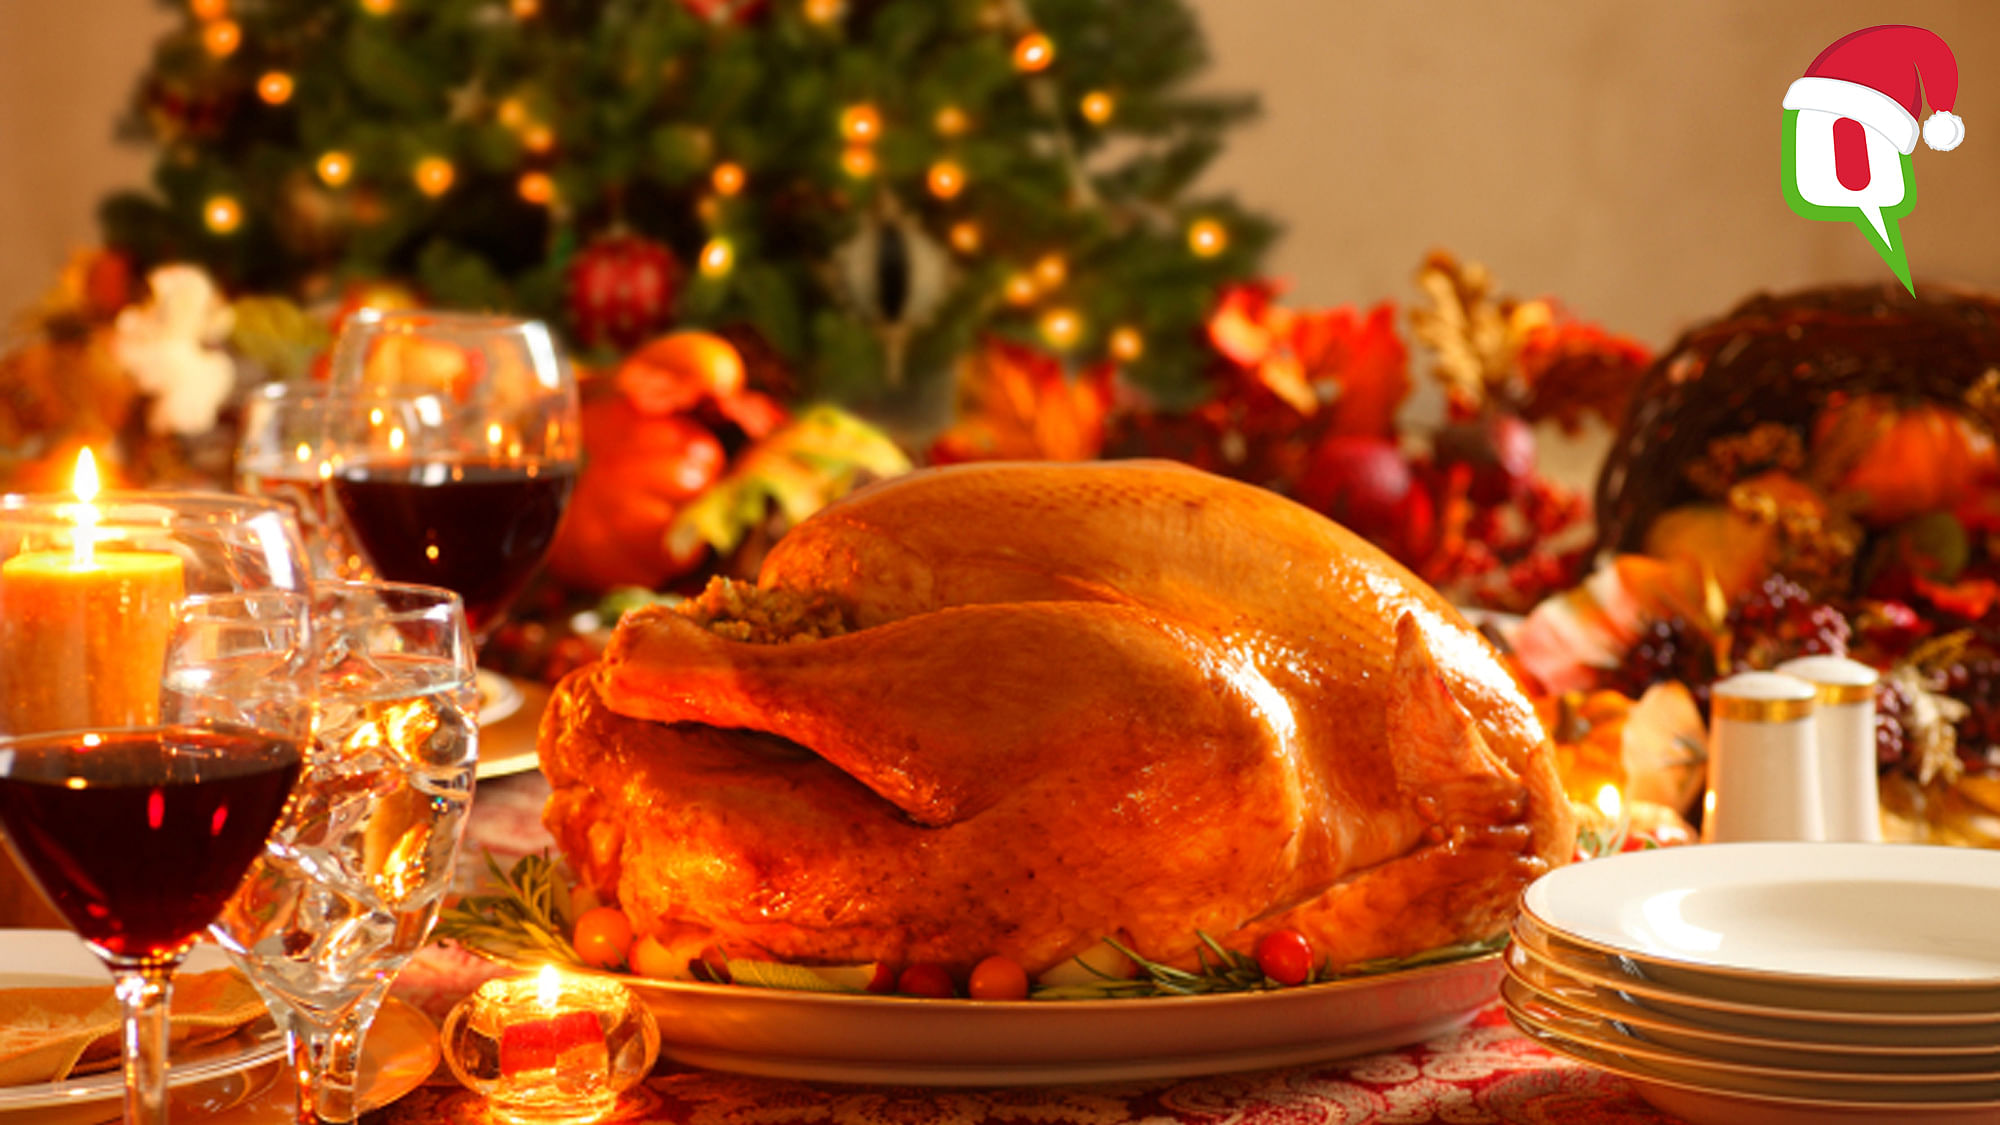 We bring you some mouthwatering dishes that will make your Christmas even more special! (Photo: iStock)